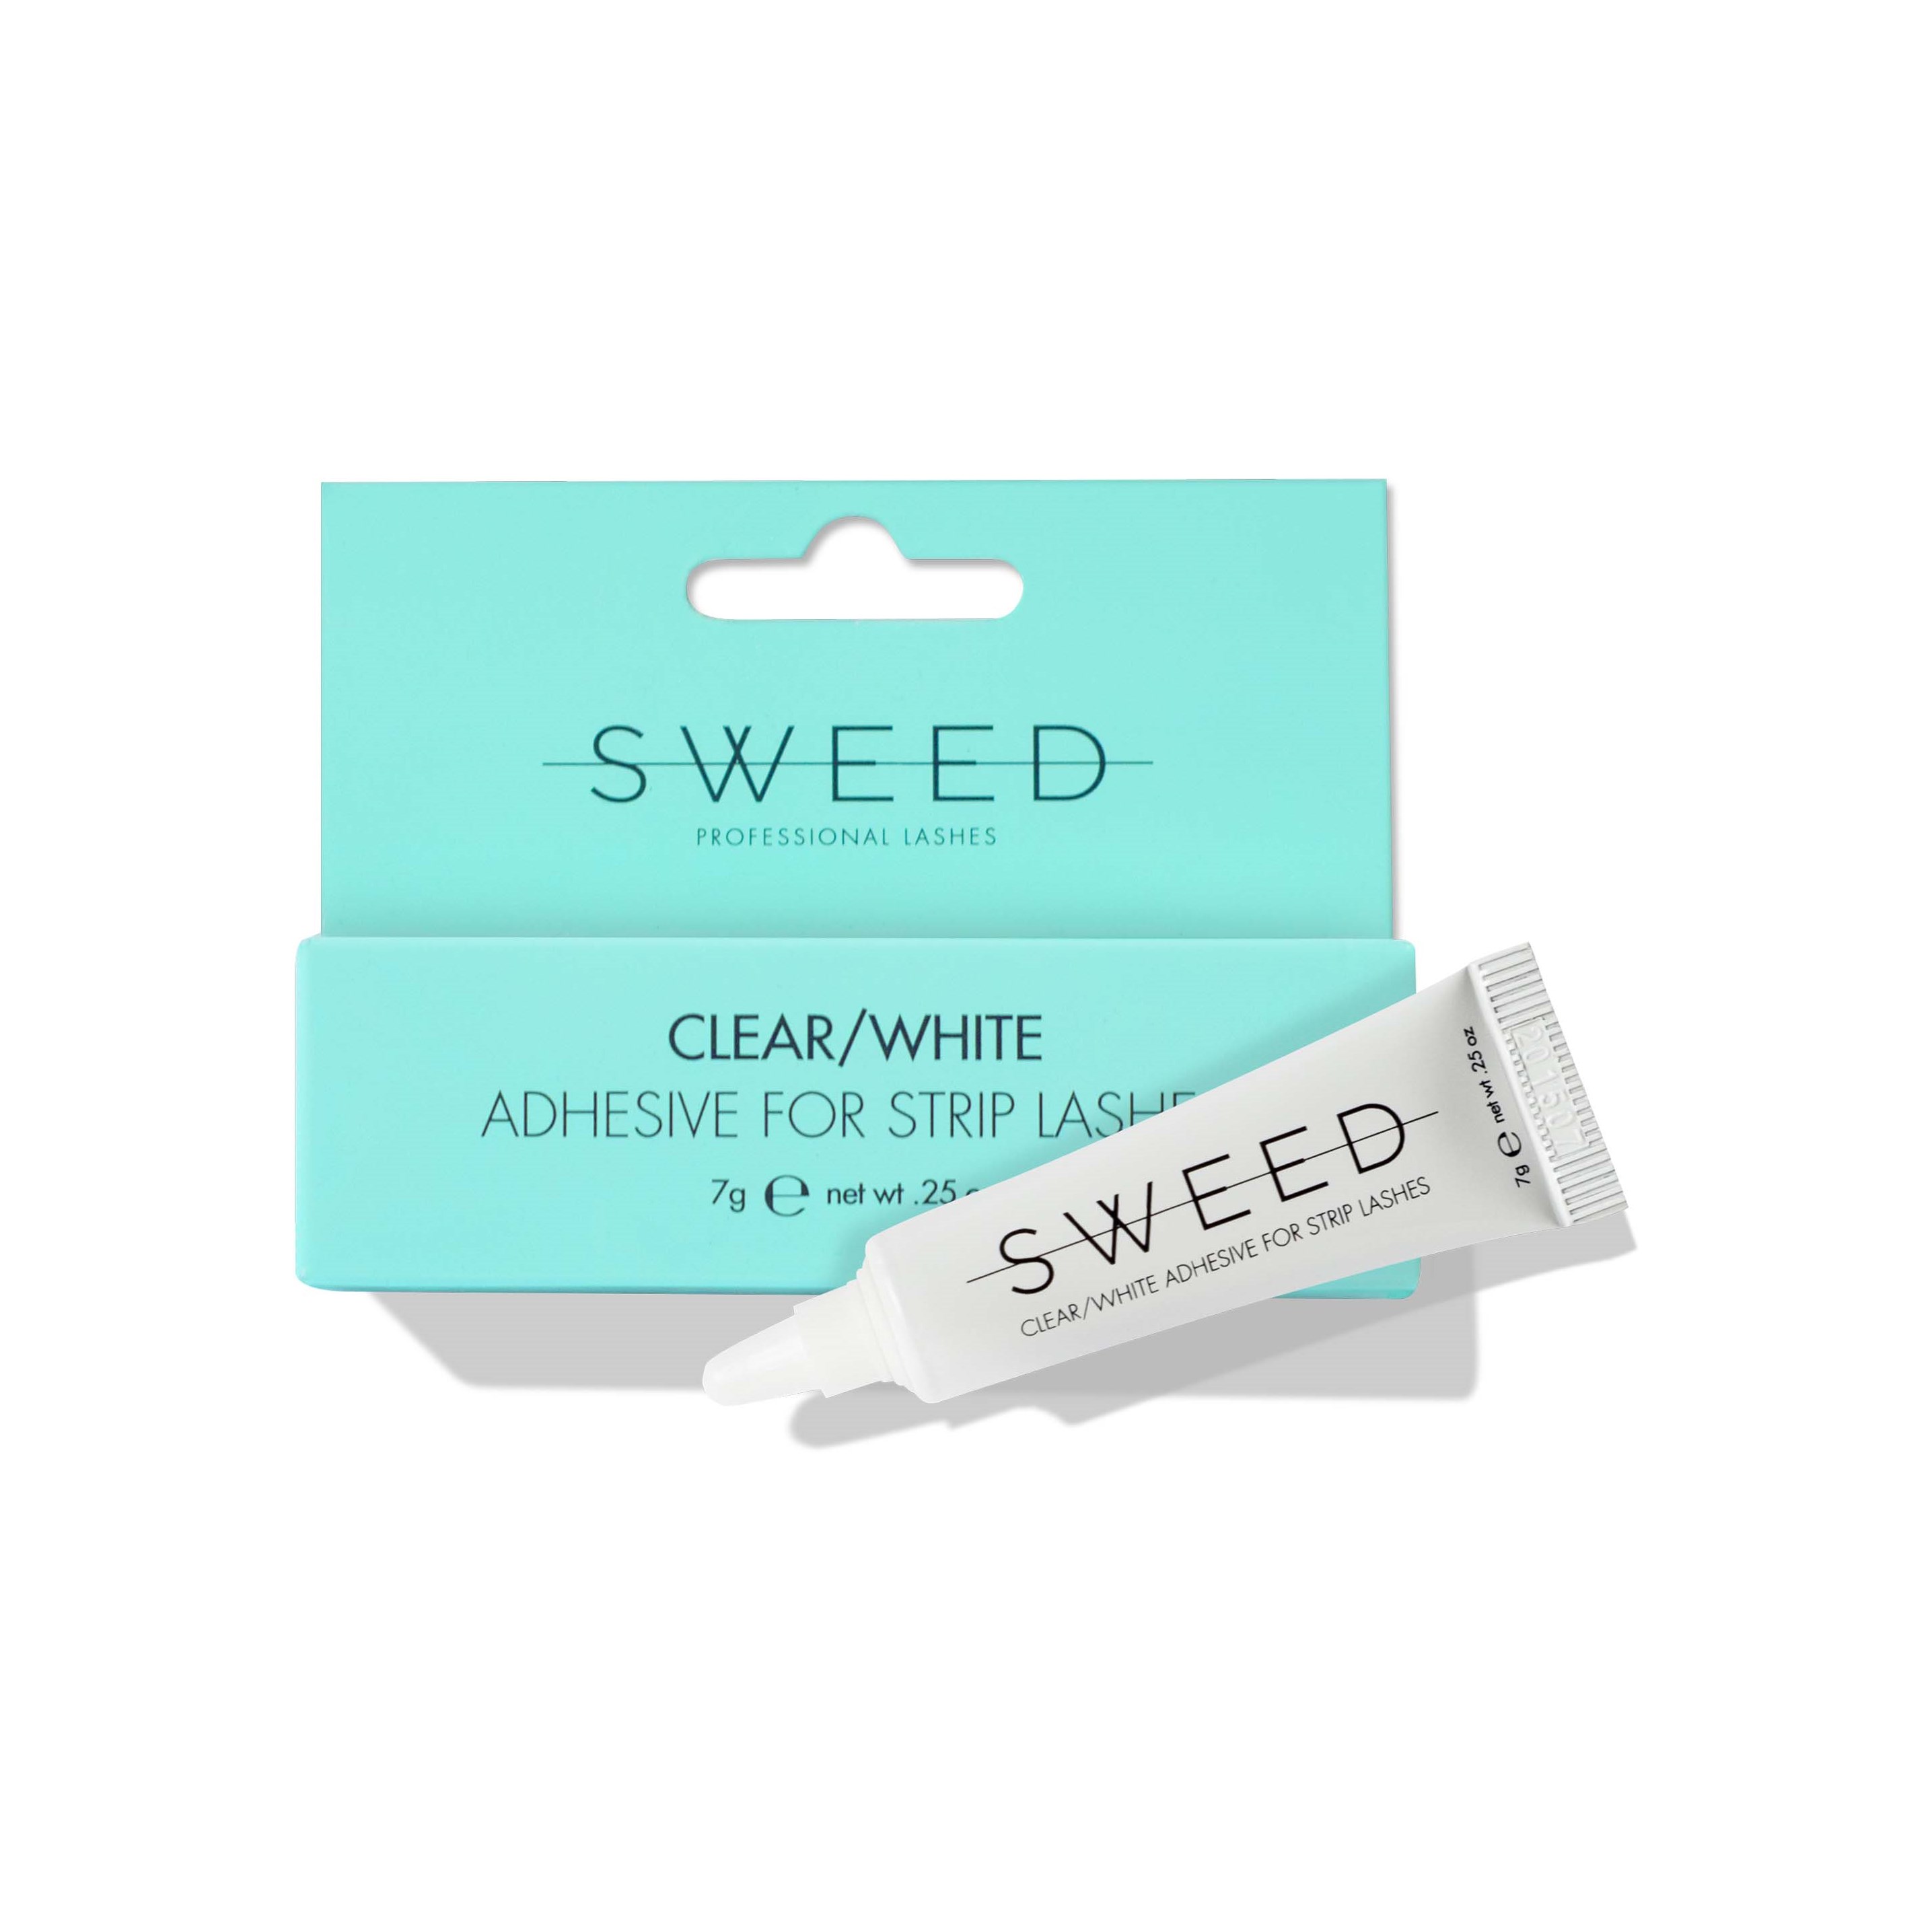 Sweed Clear/White For Strip Lashes Adhesive